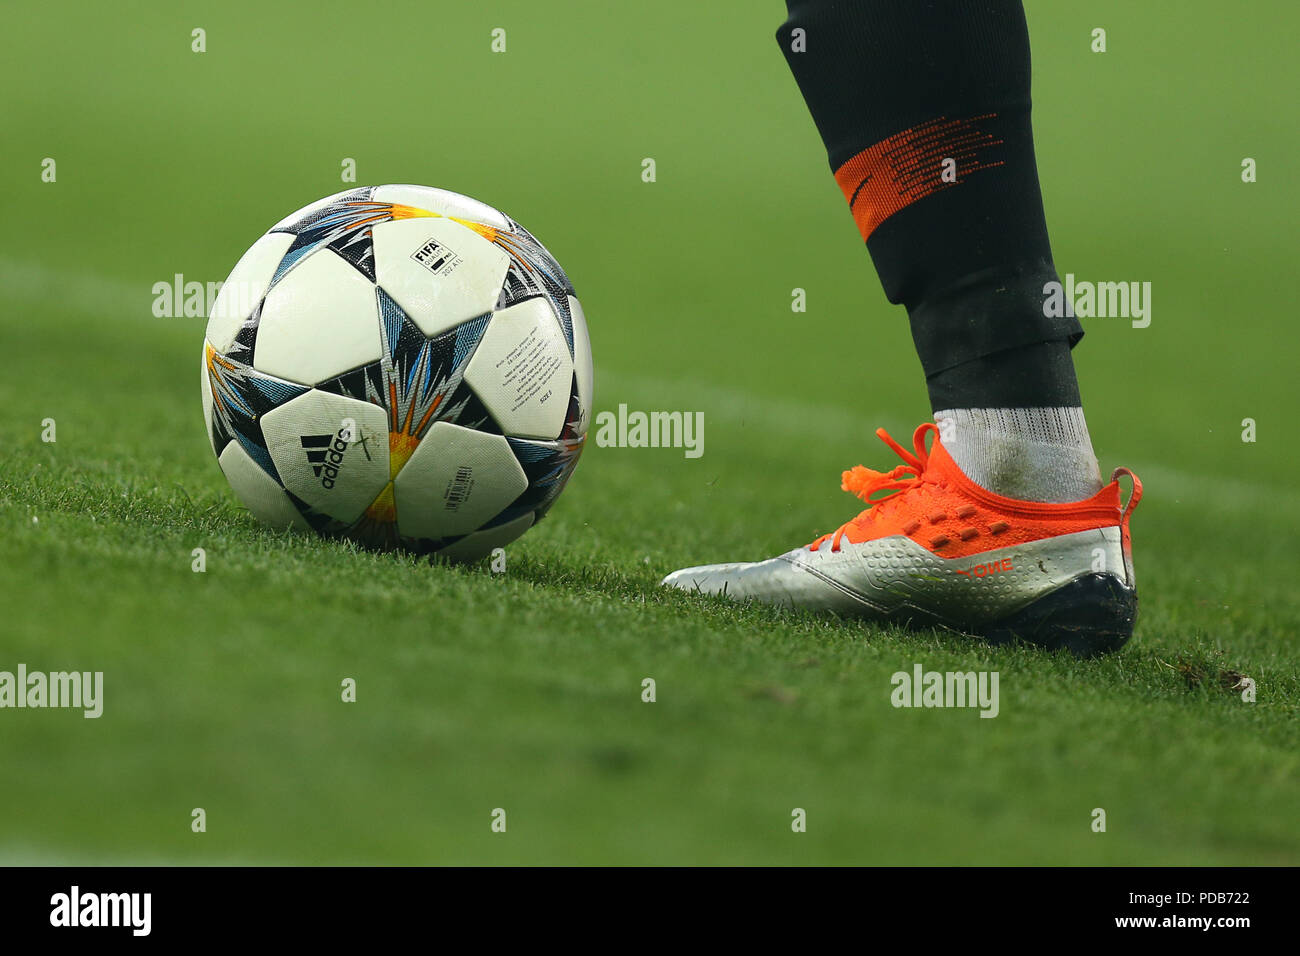 3 AUGUST, 2018 - KIEV, UKRAINE: Official match ball of UEFA Champions  League dribbled by player with Puma silver boots isolated on the green  pitch Stock Photo - Alamy